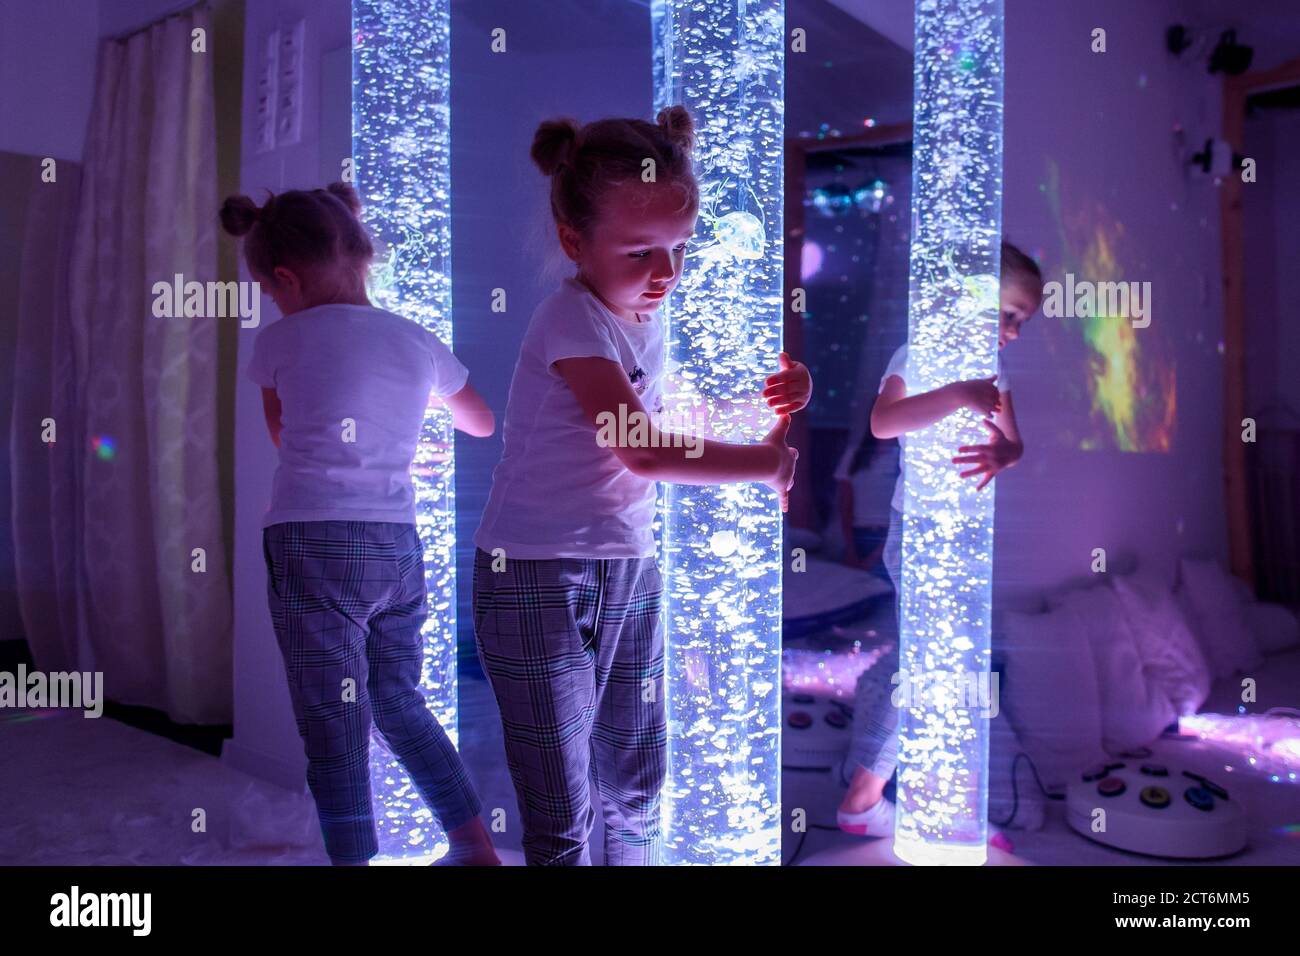 Child in therapy sensory stimulating room, snoezelen. Autistic child interacting with colored lights bubble tube lamp during therapy session. Stock Photo